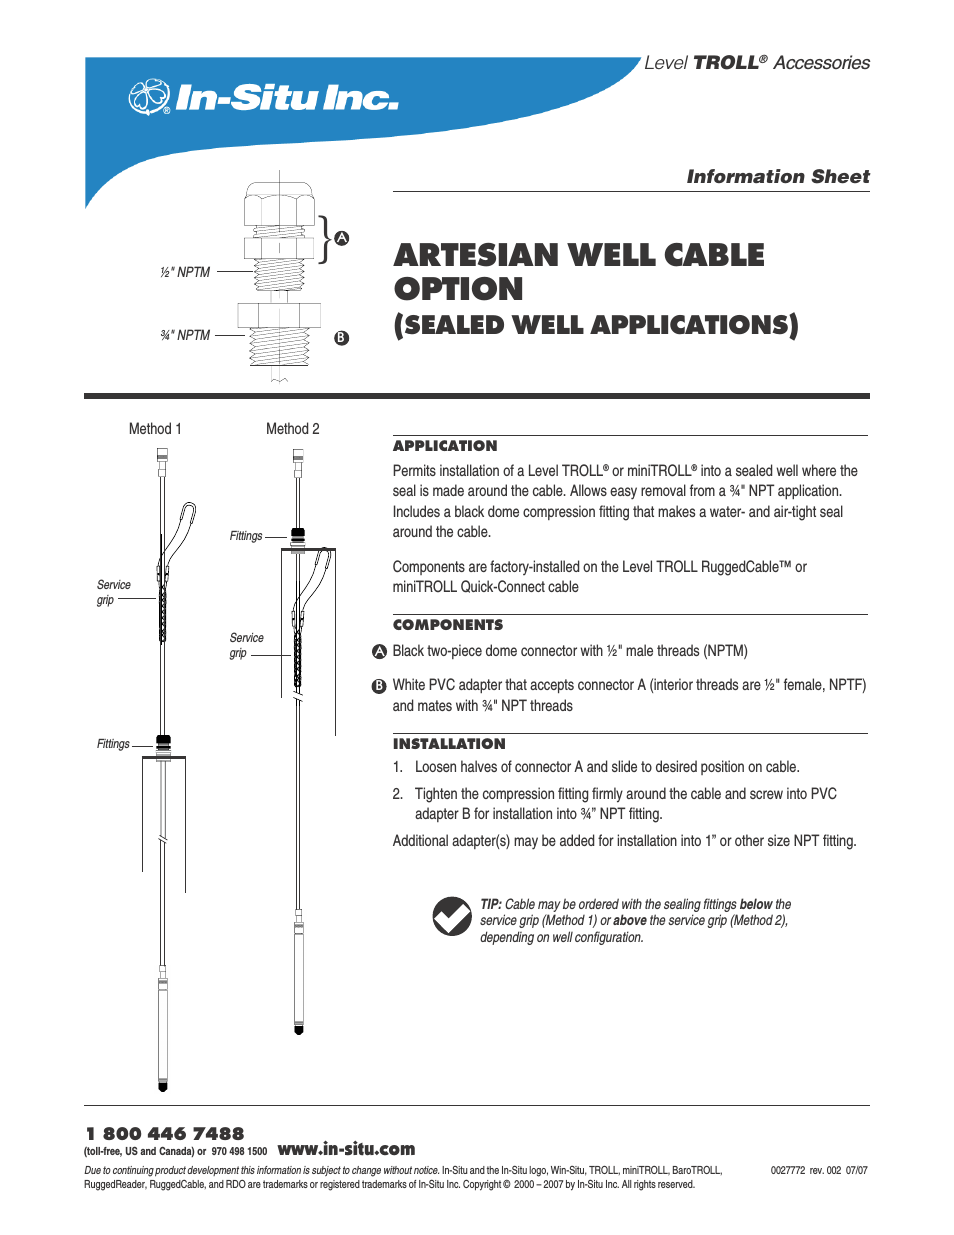 Artesian Well Cable Option (factory installed) for Level TROLL and miniTROLL